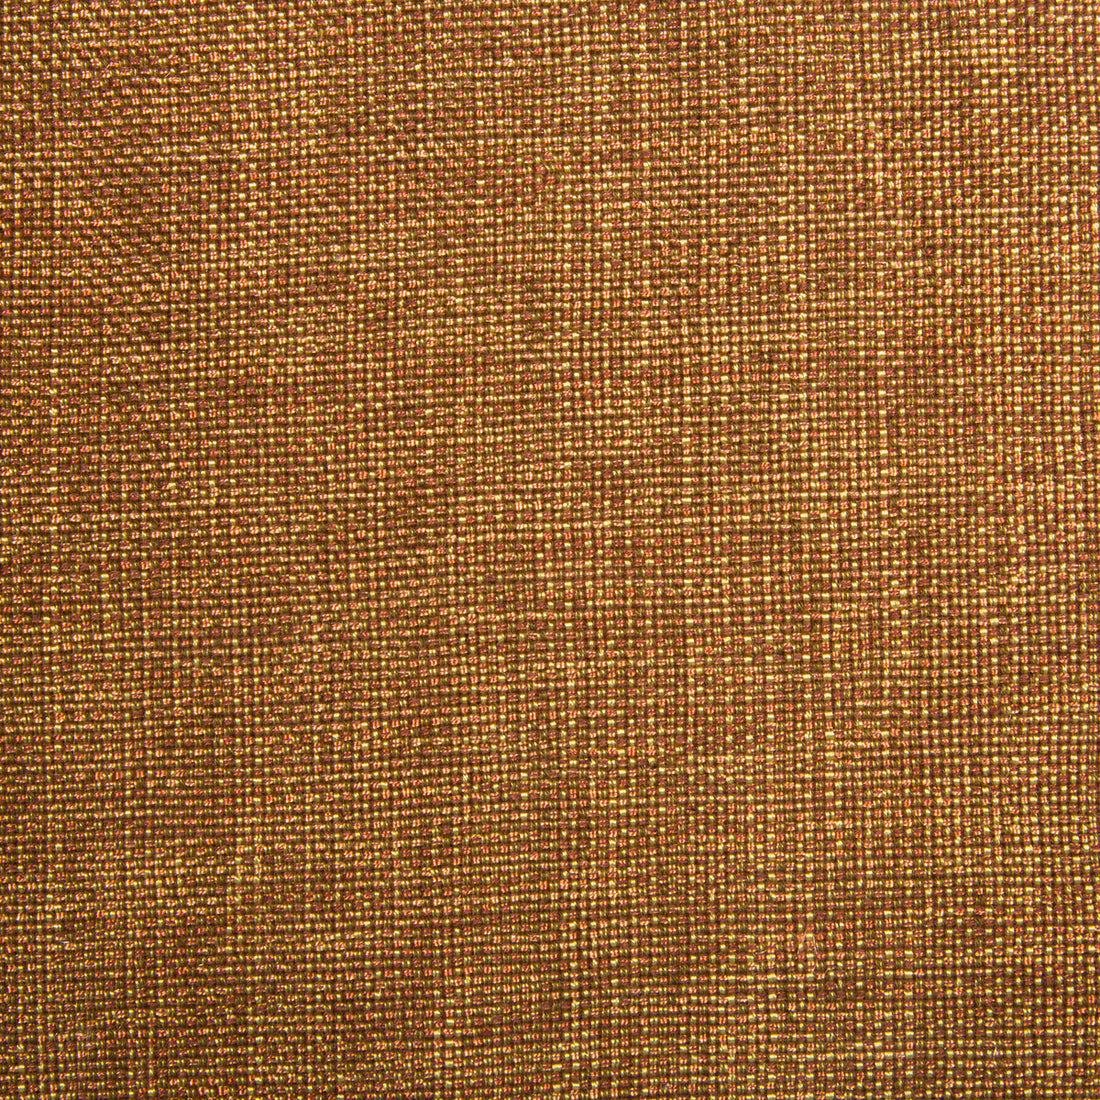 Kravet Contract fabric in 34926-424 color - pattern 34926.424.0 - by Kravet Contract